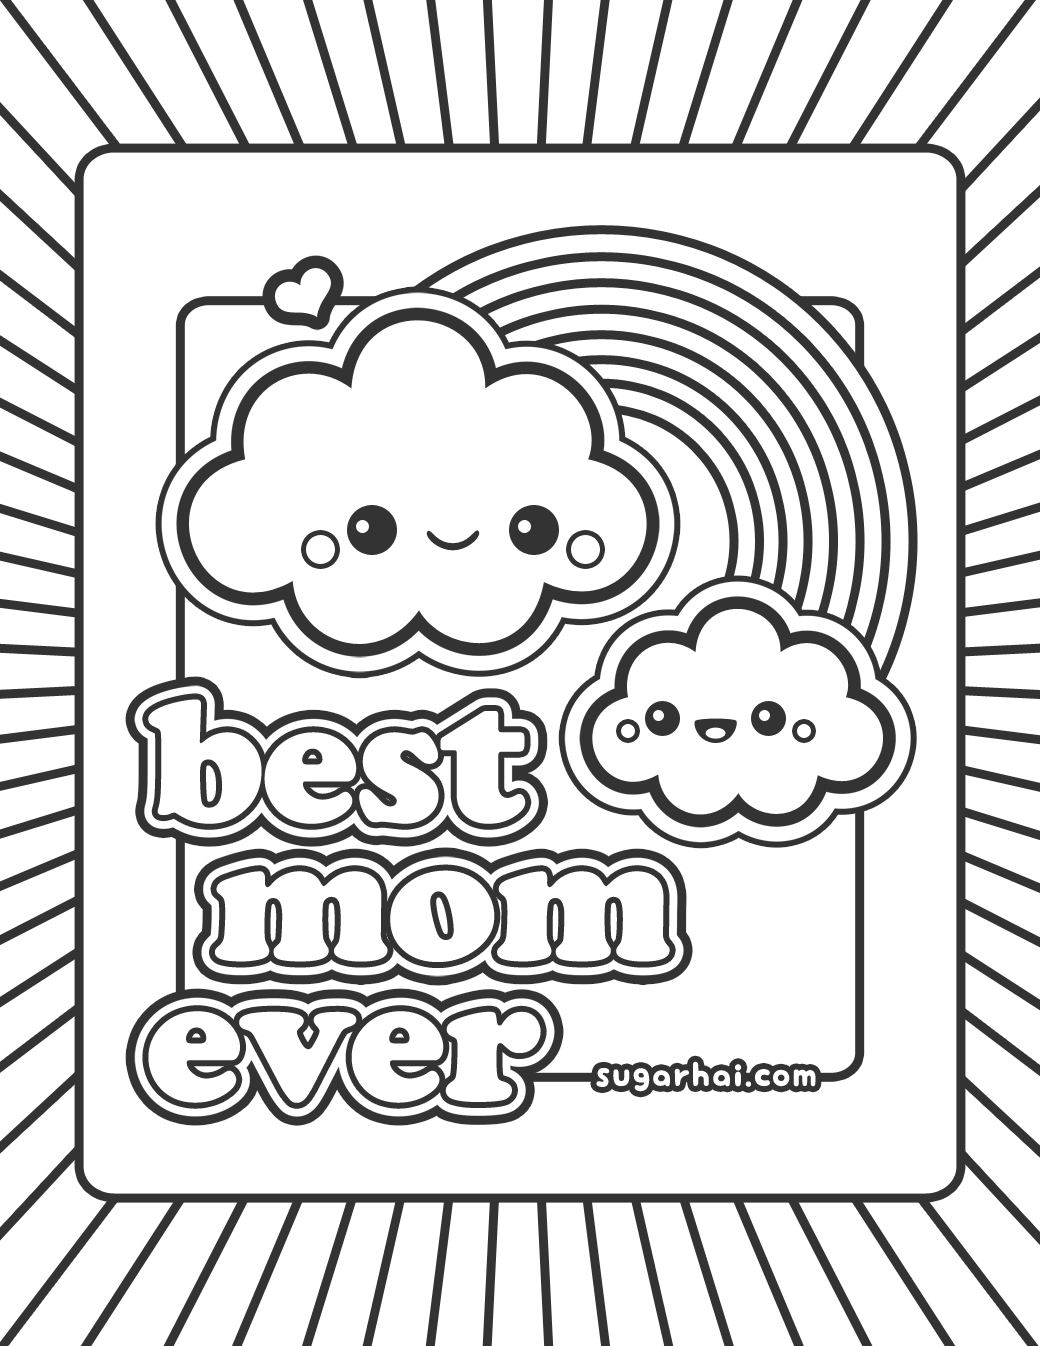 Best Mom In The World Coloring Pages - Coloring Pages